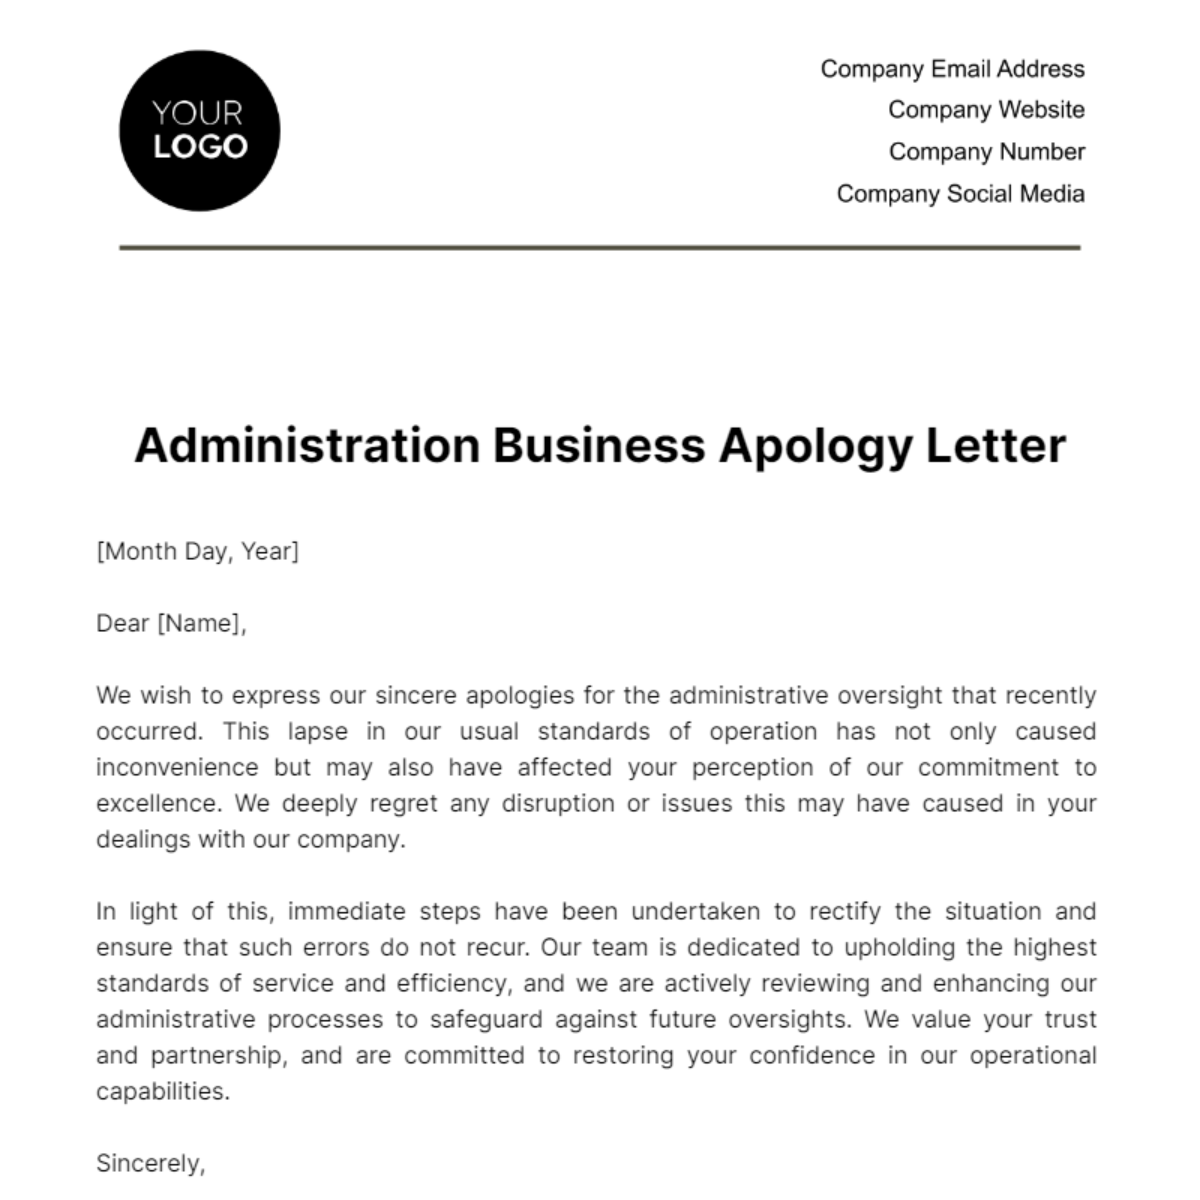 Administration Business Apology Letter Template